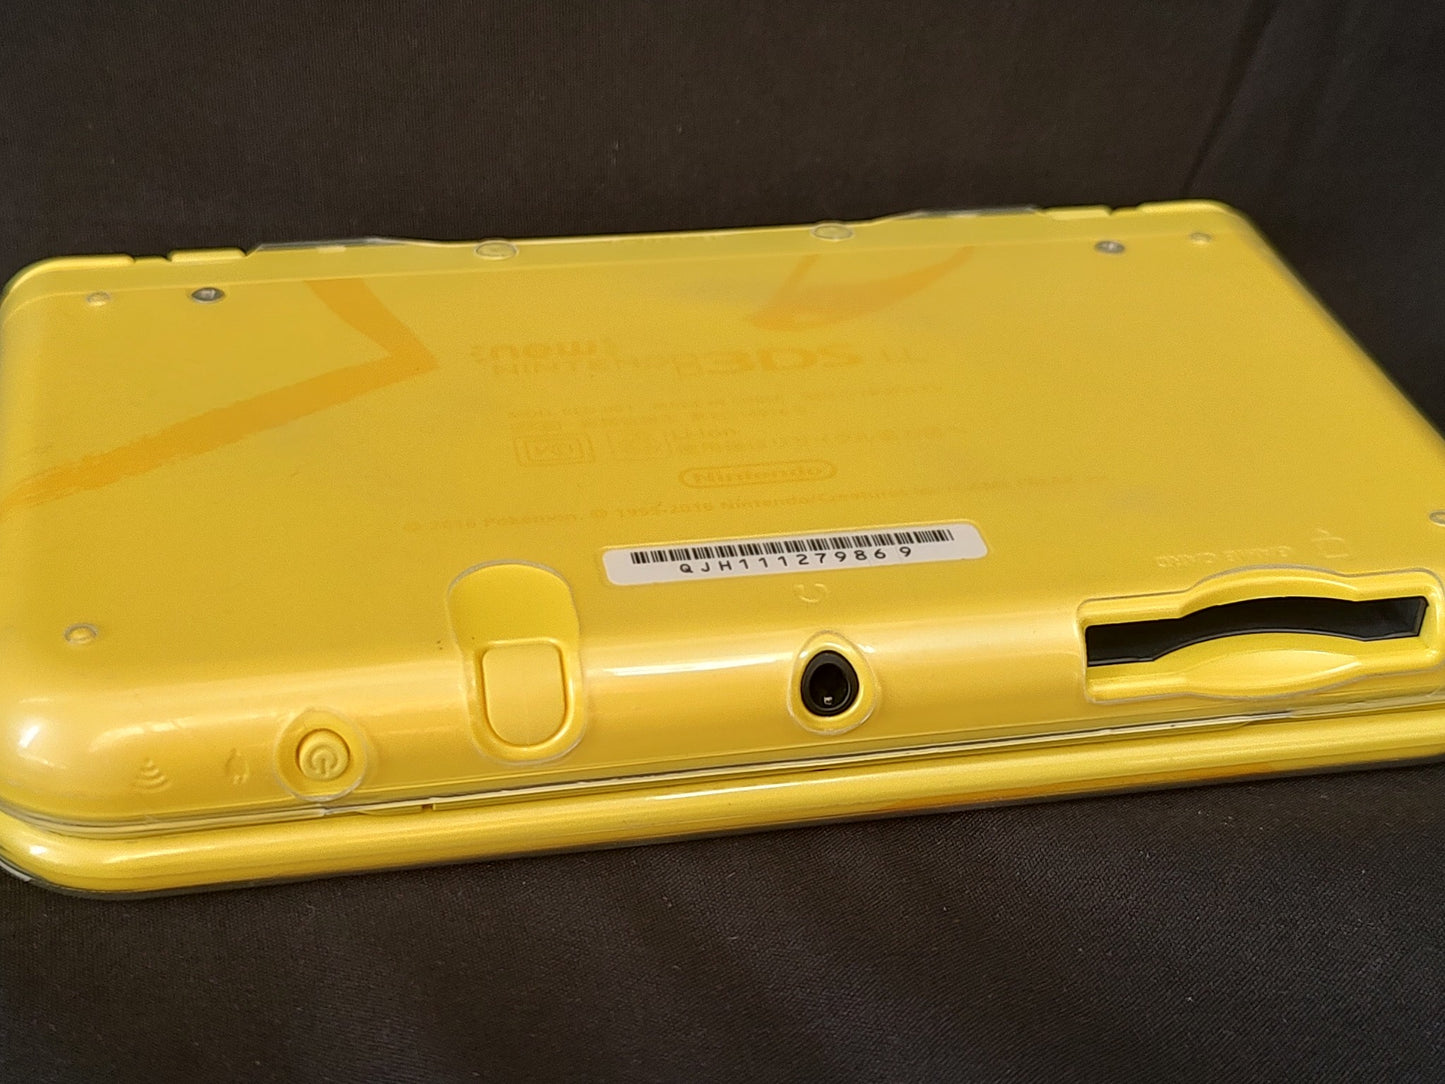 Used, New 3DS XL Yellow Pokemon Pikachu Limited Japan Edition, Working-g0304-